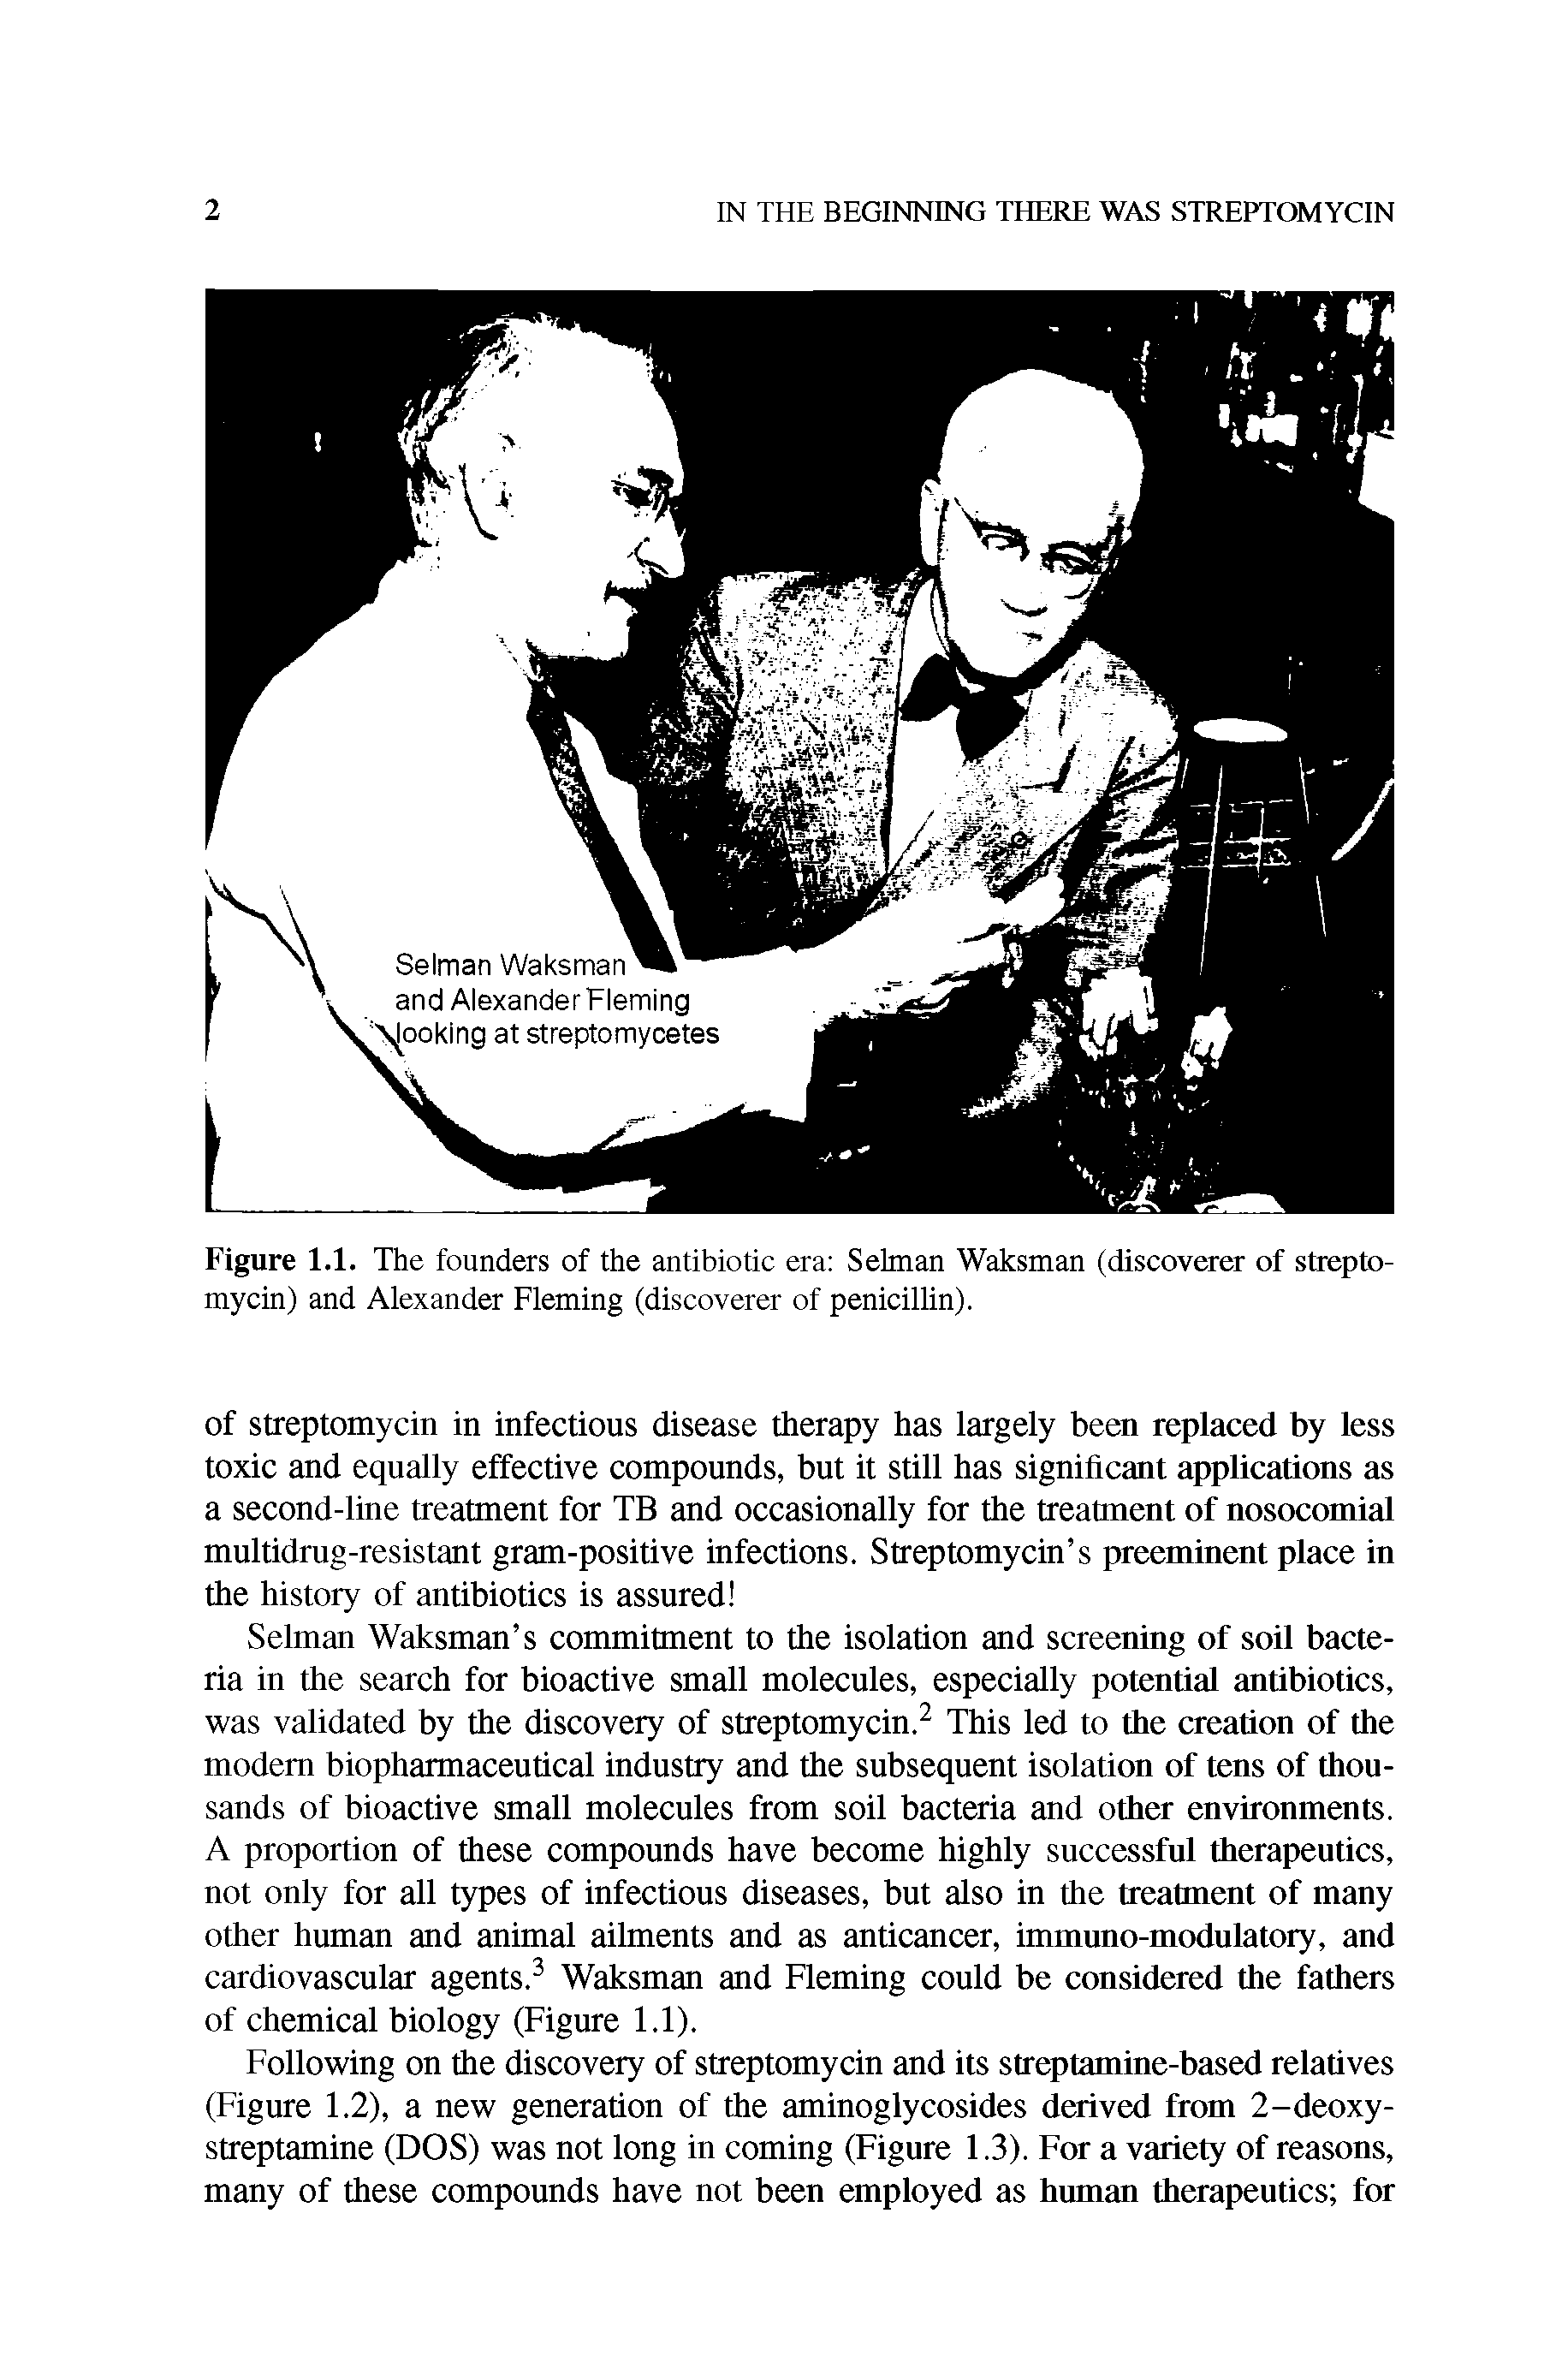 Figure 1.1. The founders of the antibiotic era Sehnan Waksman (discoverer of streptomycin) and Alexander Fleming (discoverer of penicillin).